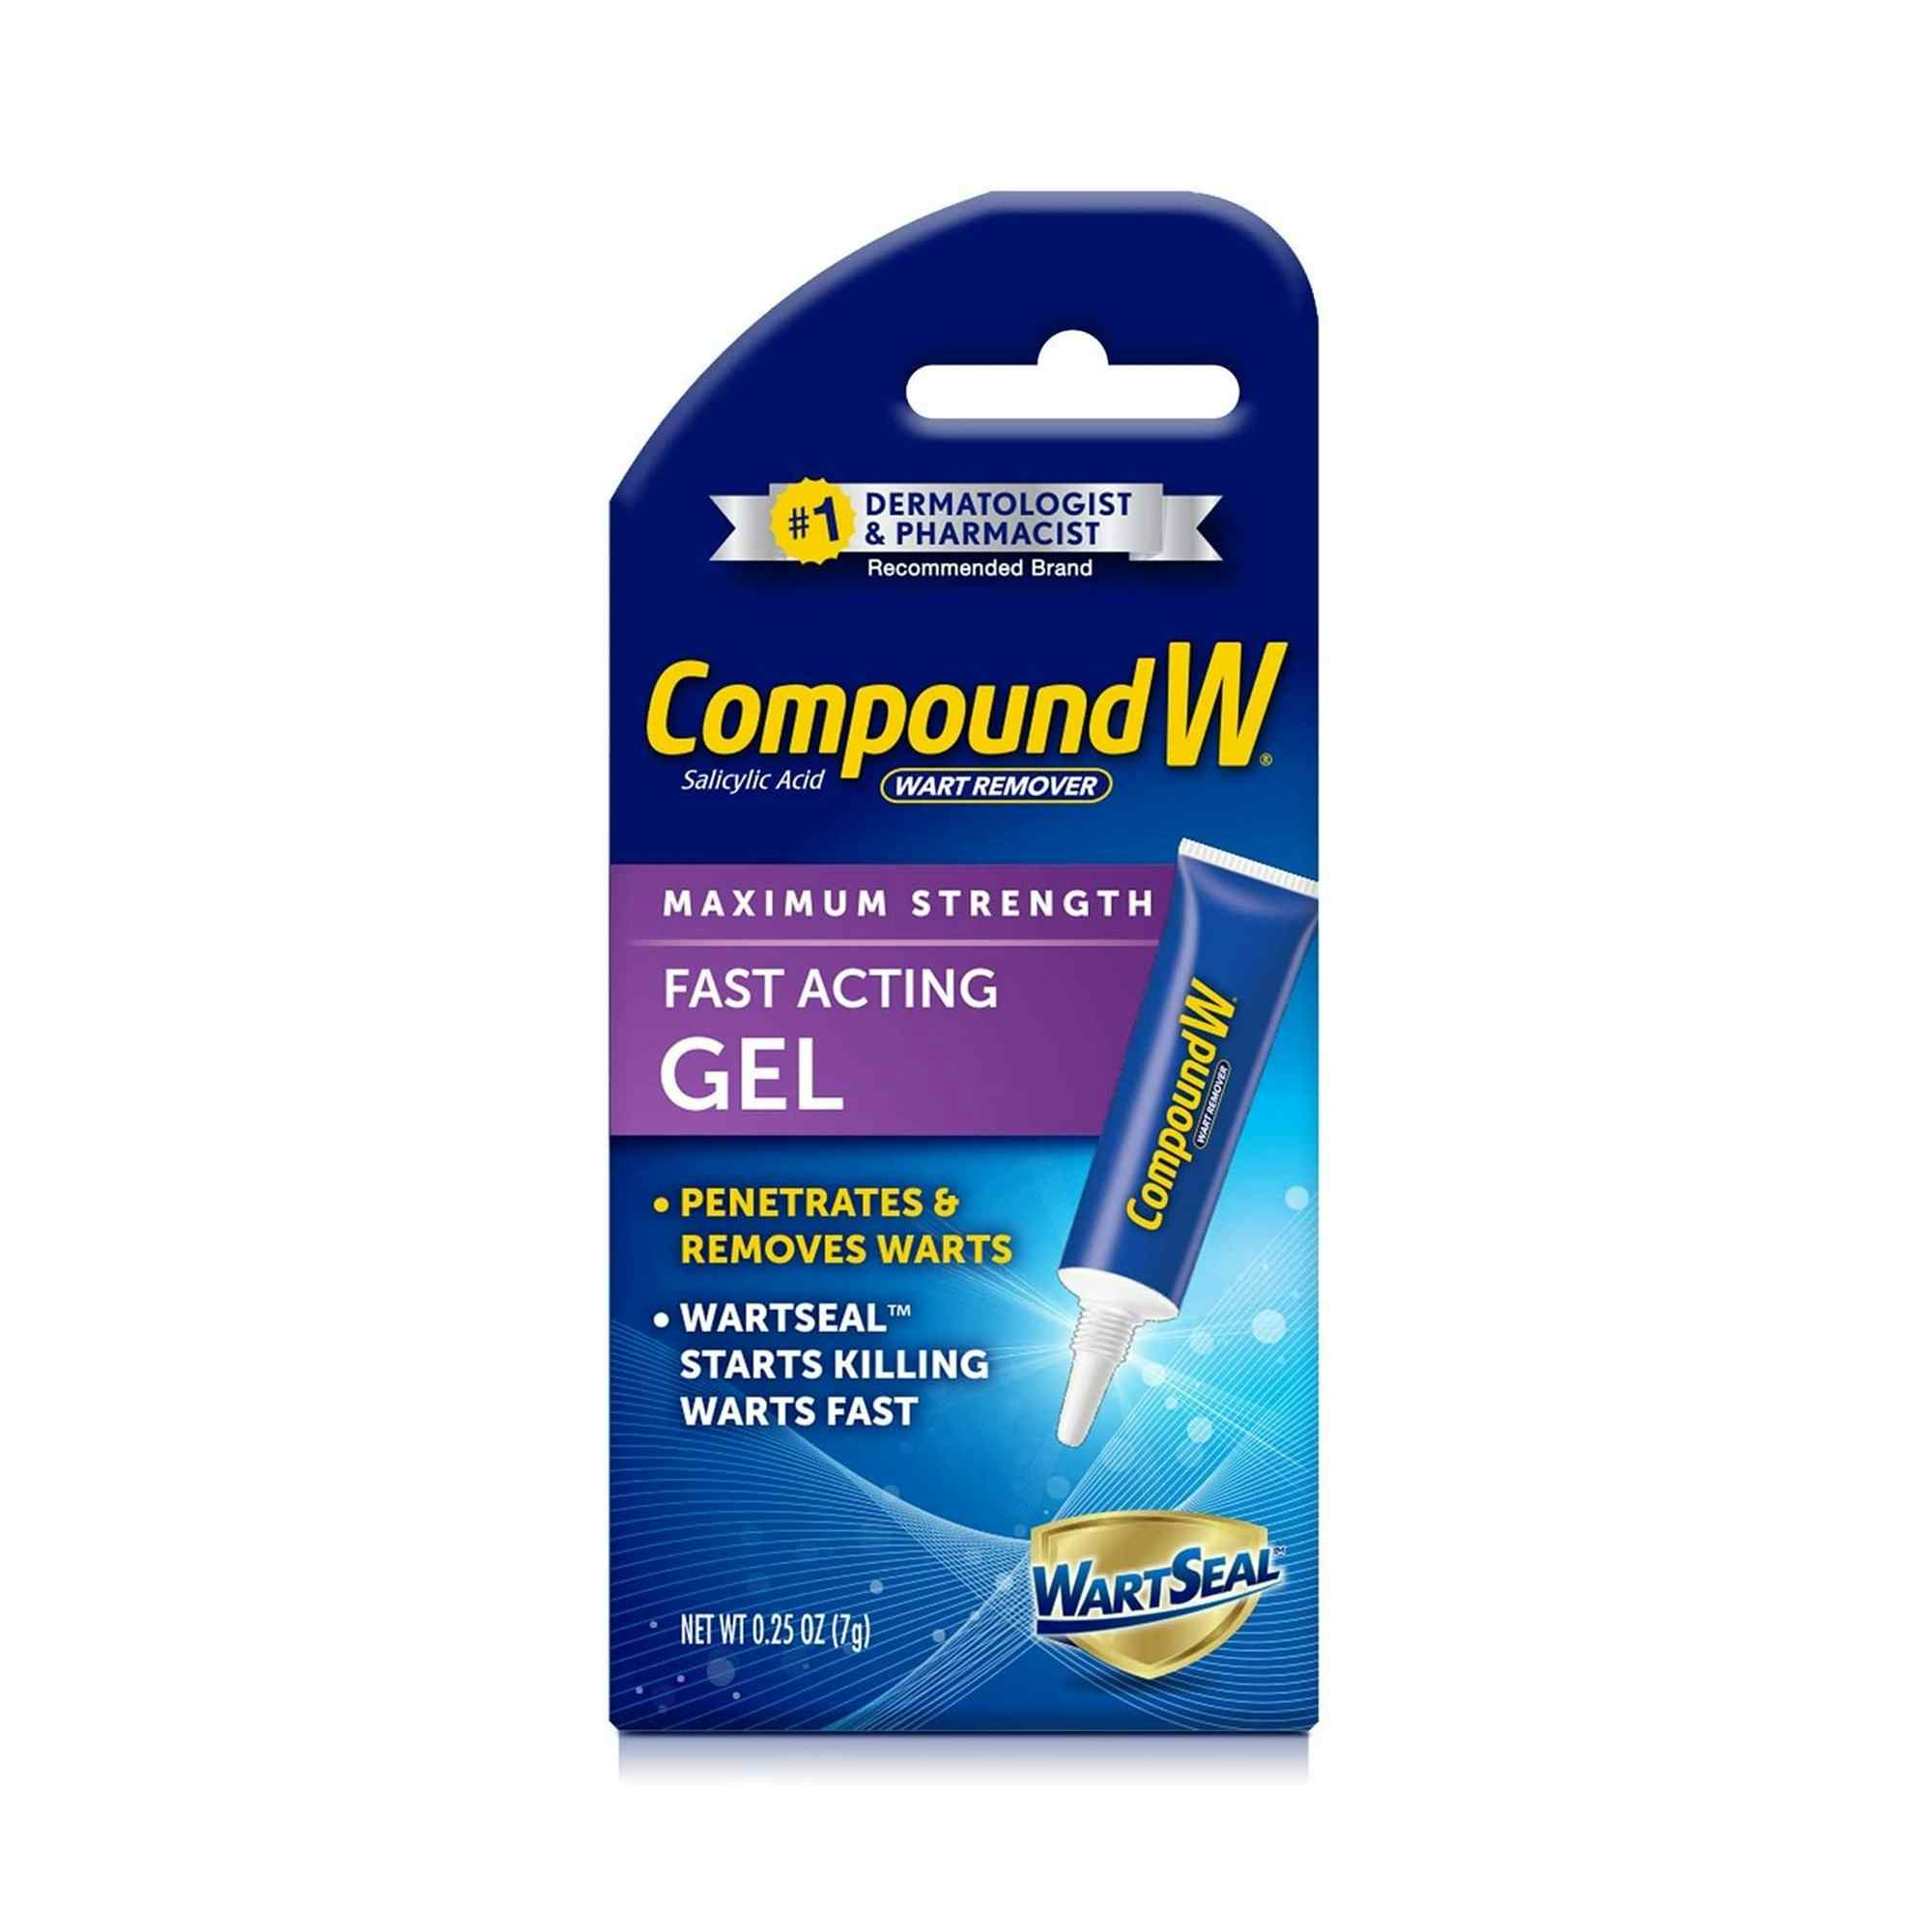 Compound W Wart Remover Maximum Strength Fast Acting Gel, 0.25 oz., 75137058507, 1 Each